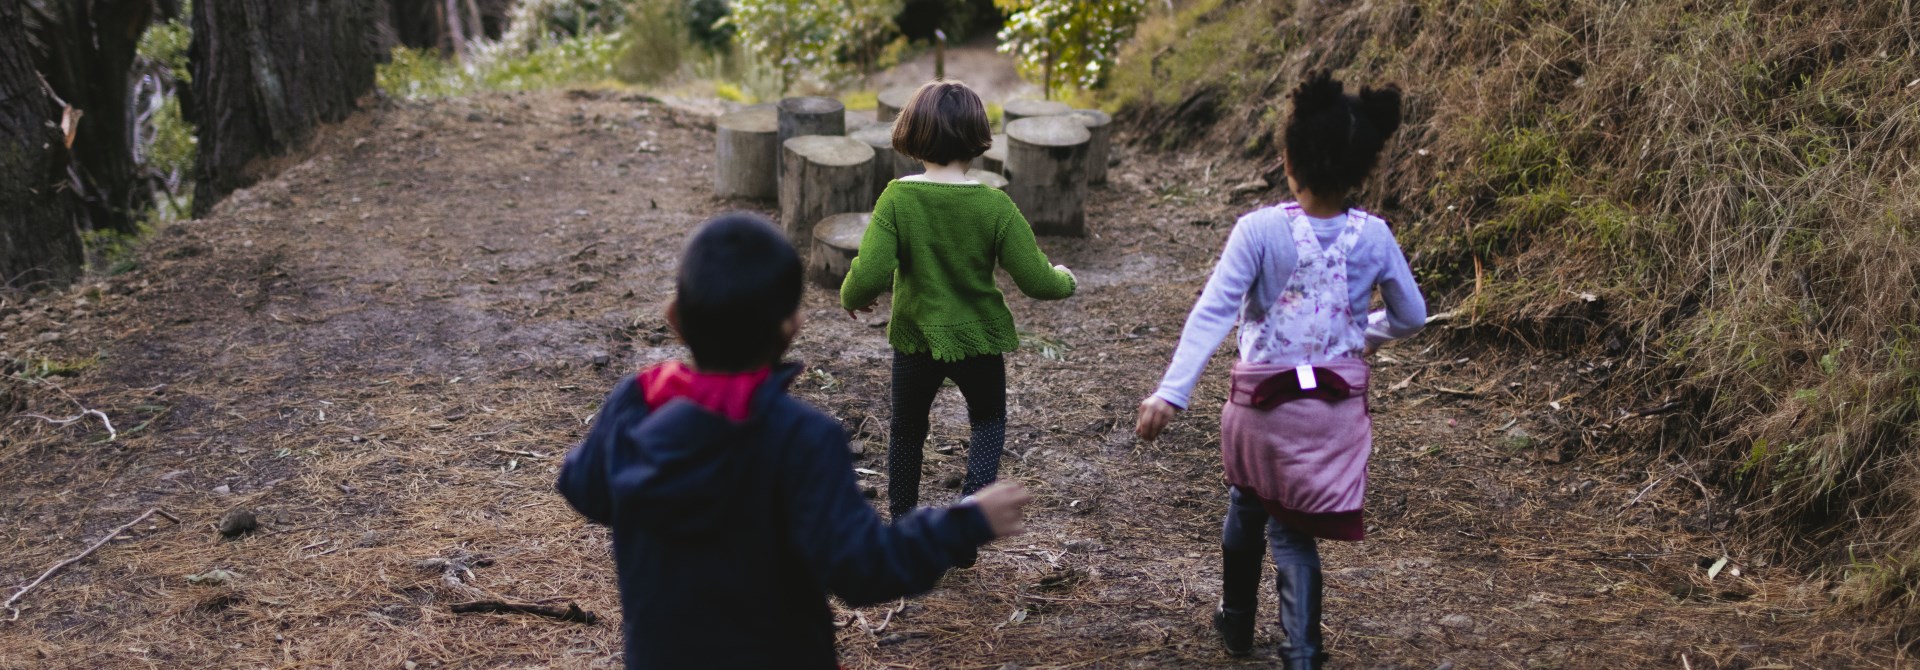 The backs of three small children running towards some short cut stepping logs in a shady pine forest with pin needles on the ground.